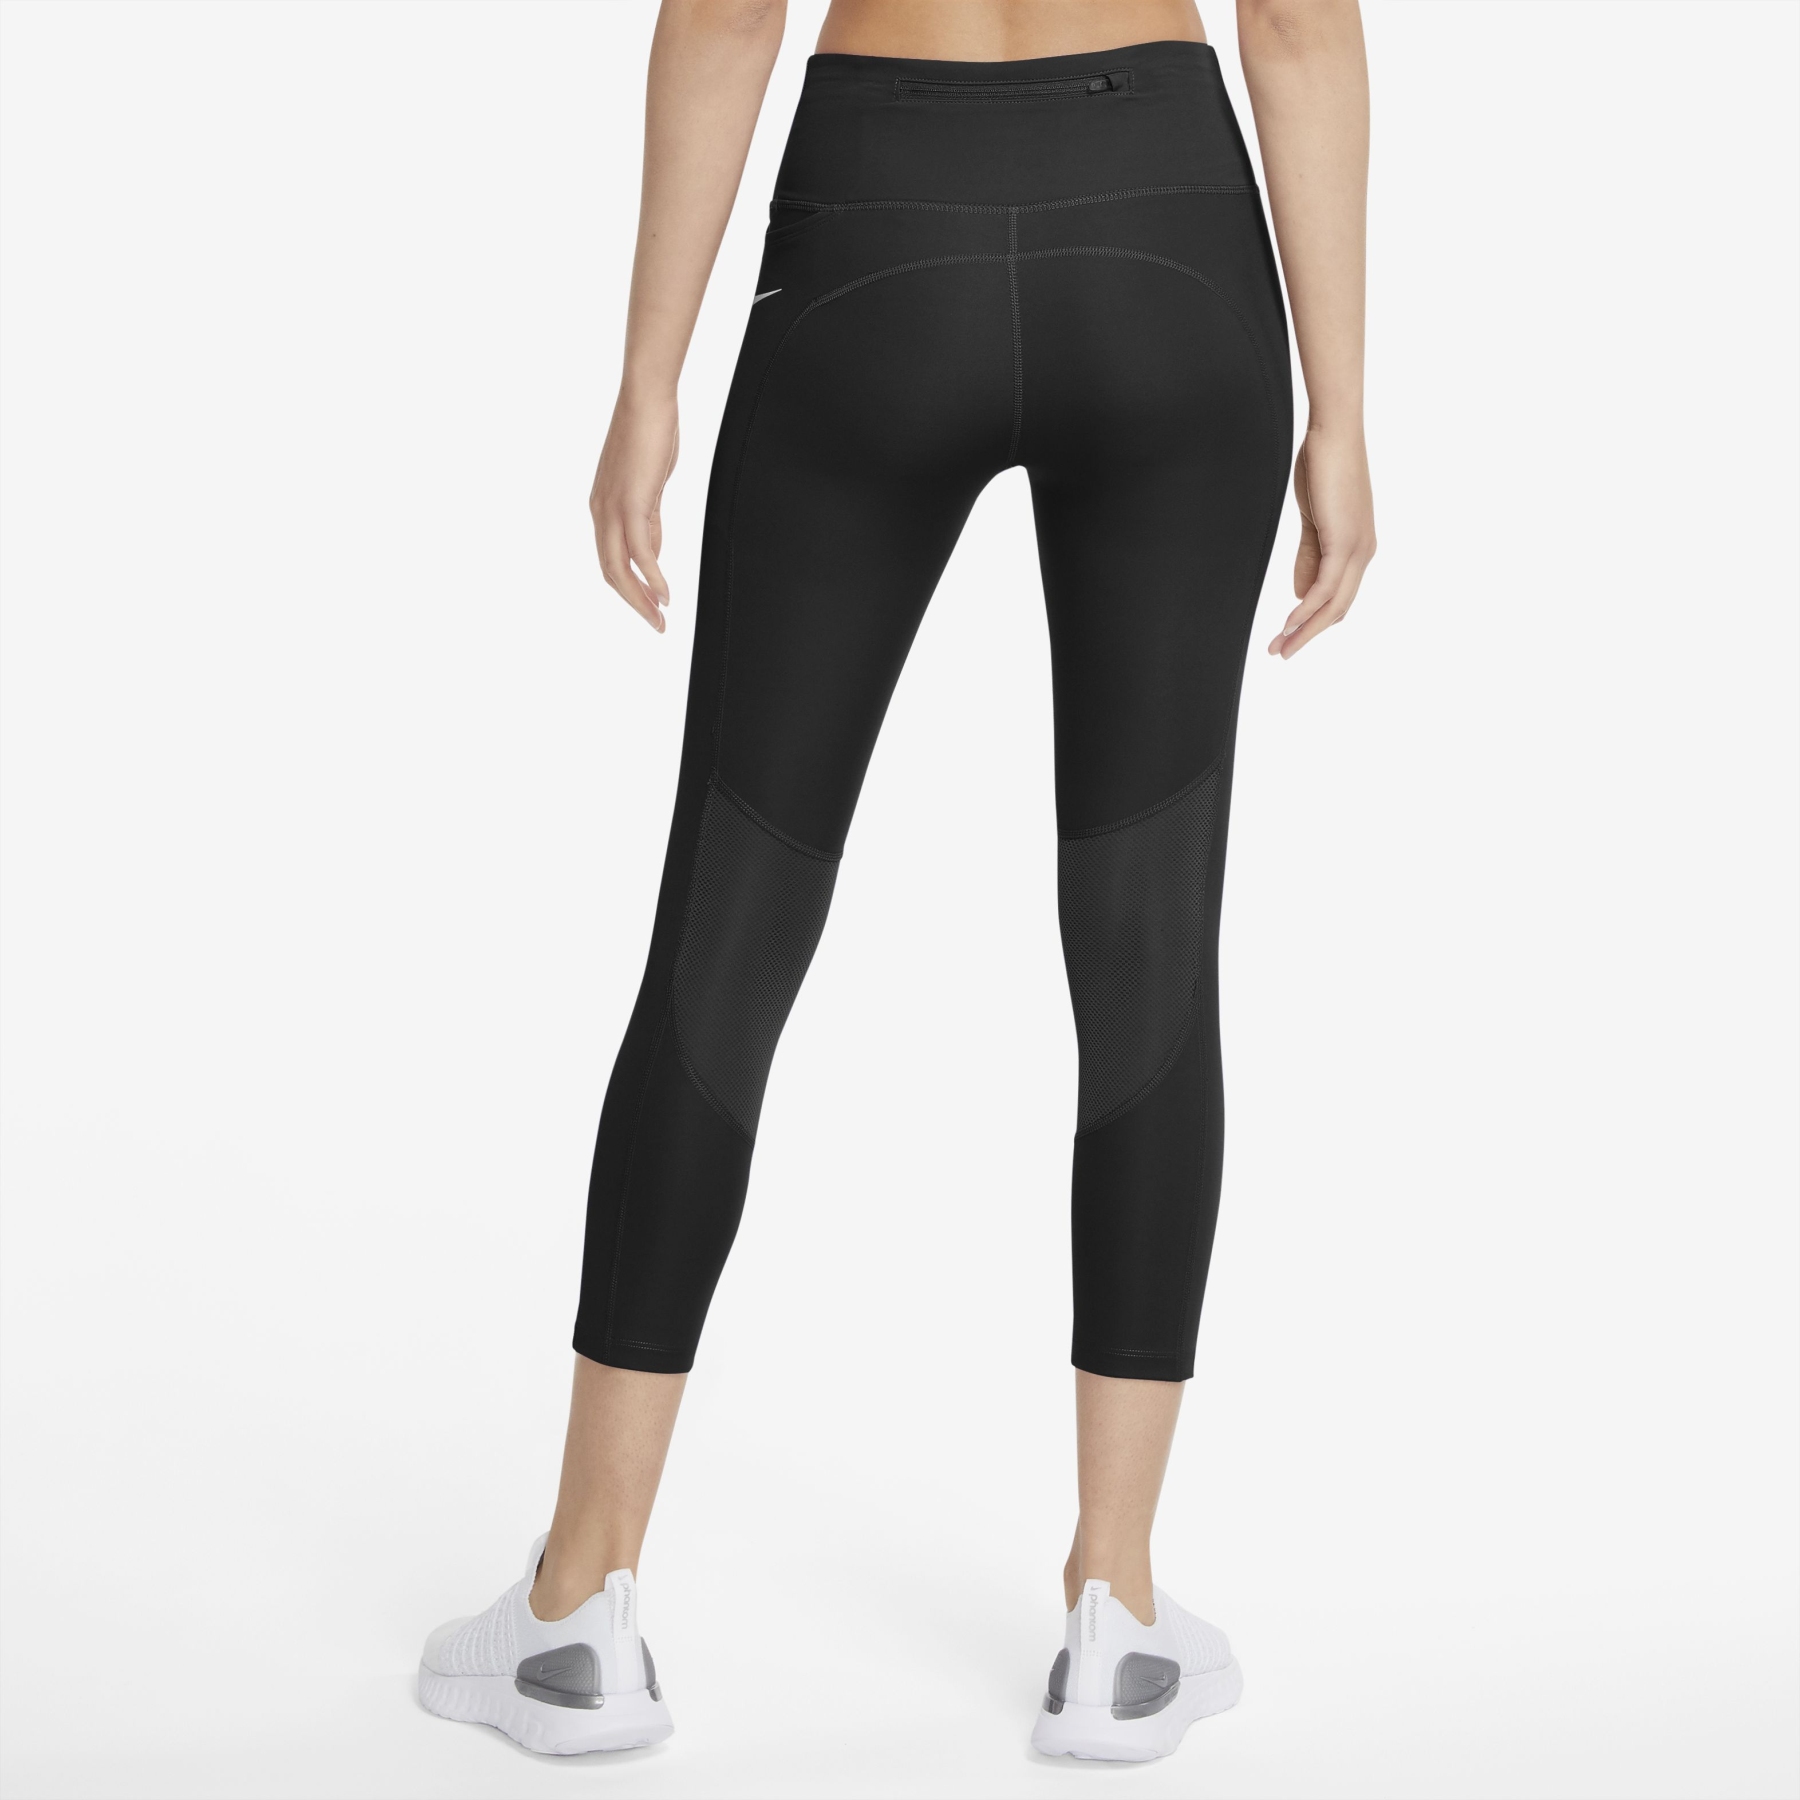 Nike Epic Fast Cropped Running Tights Women - black/reflective